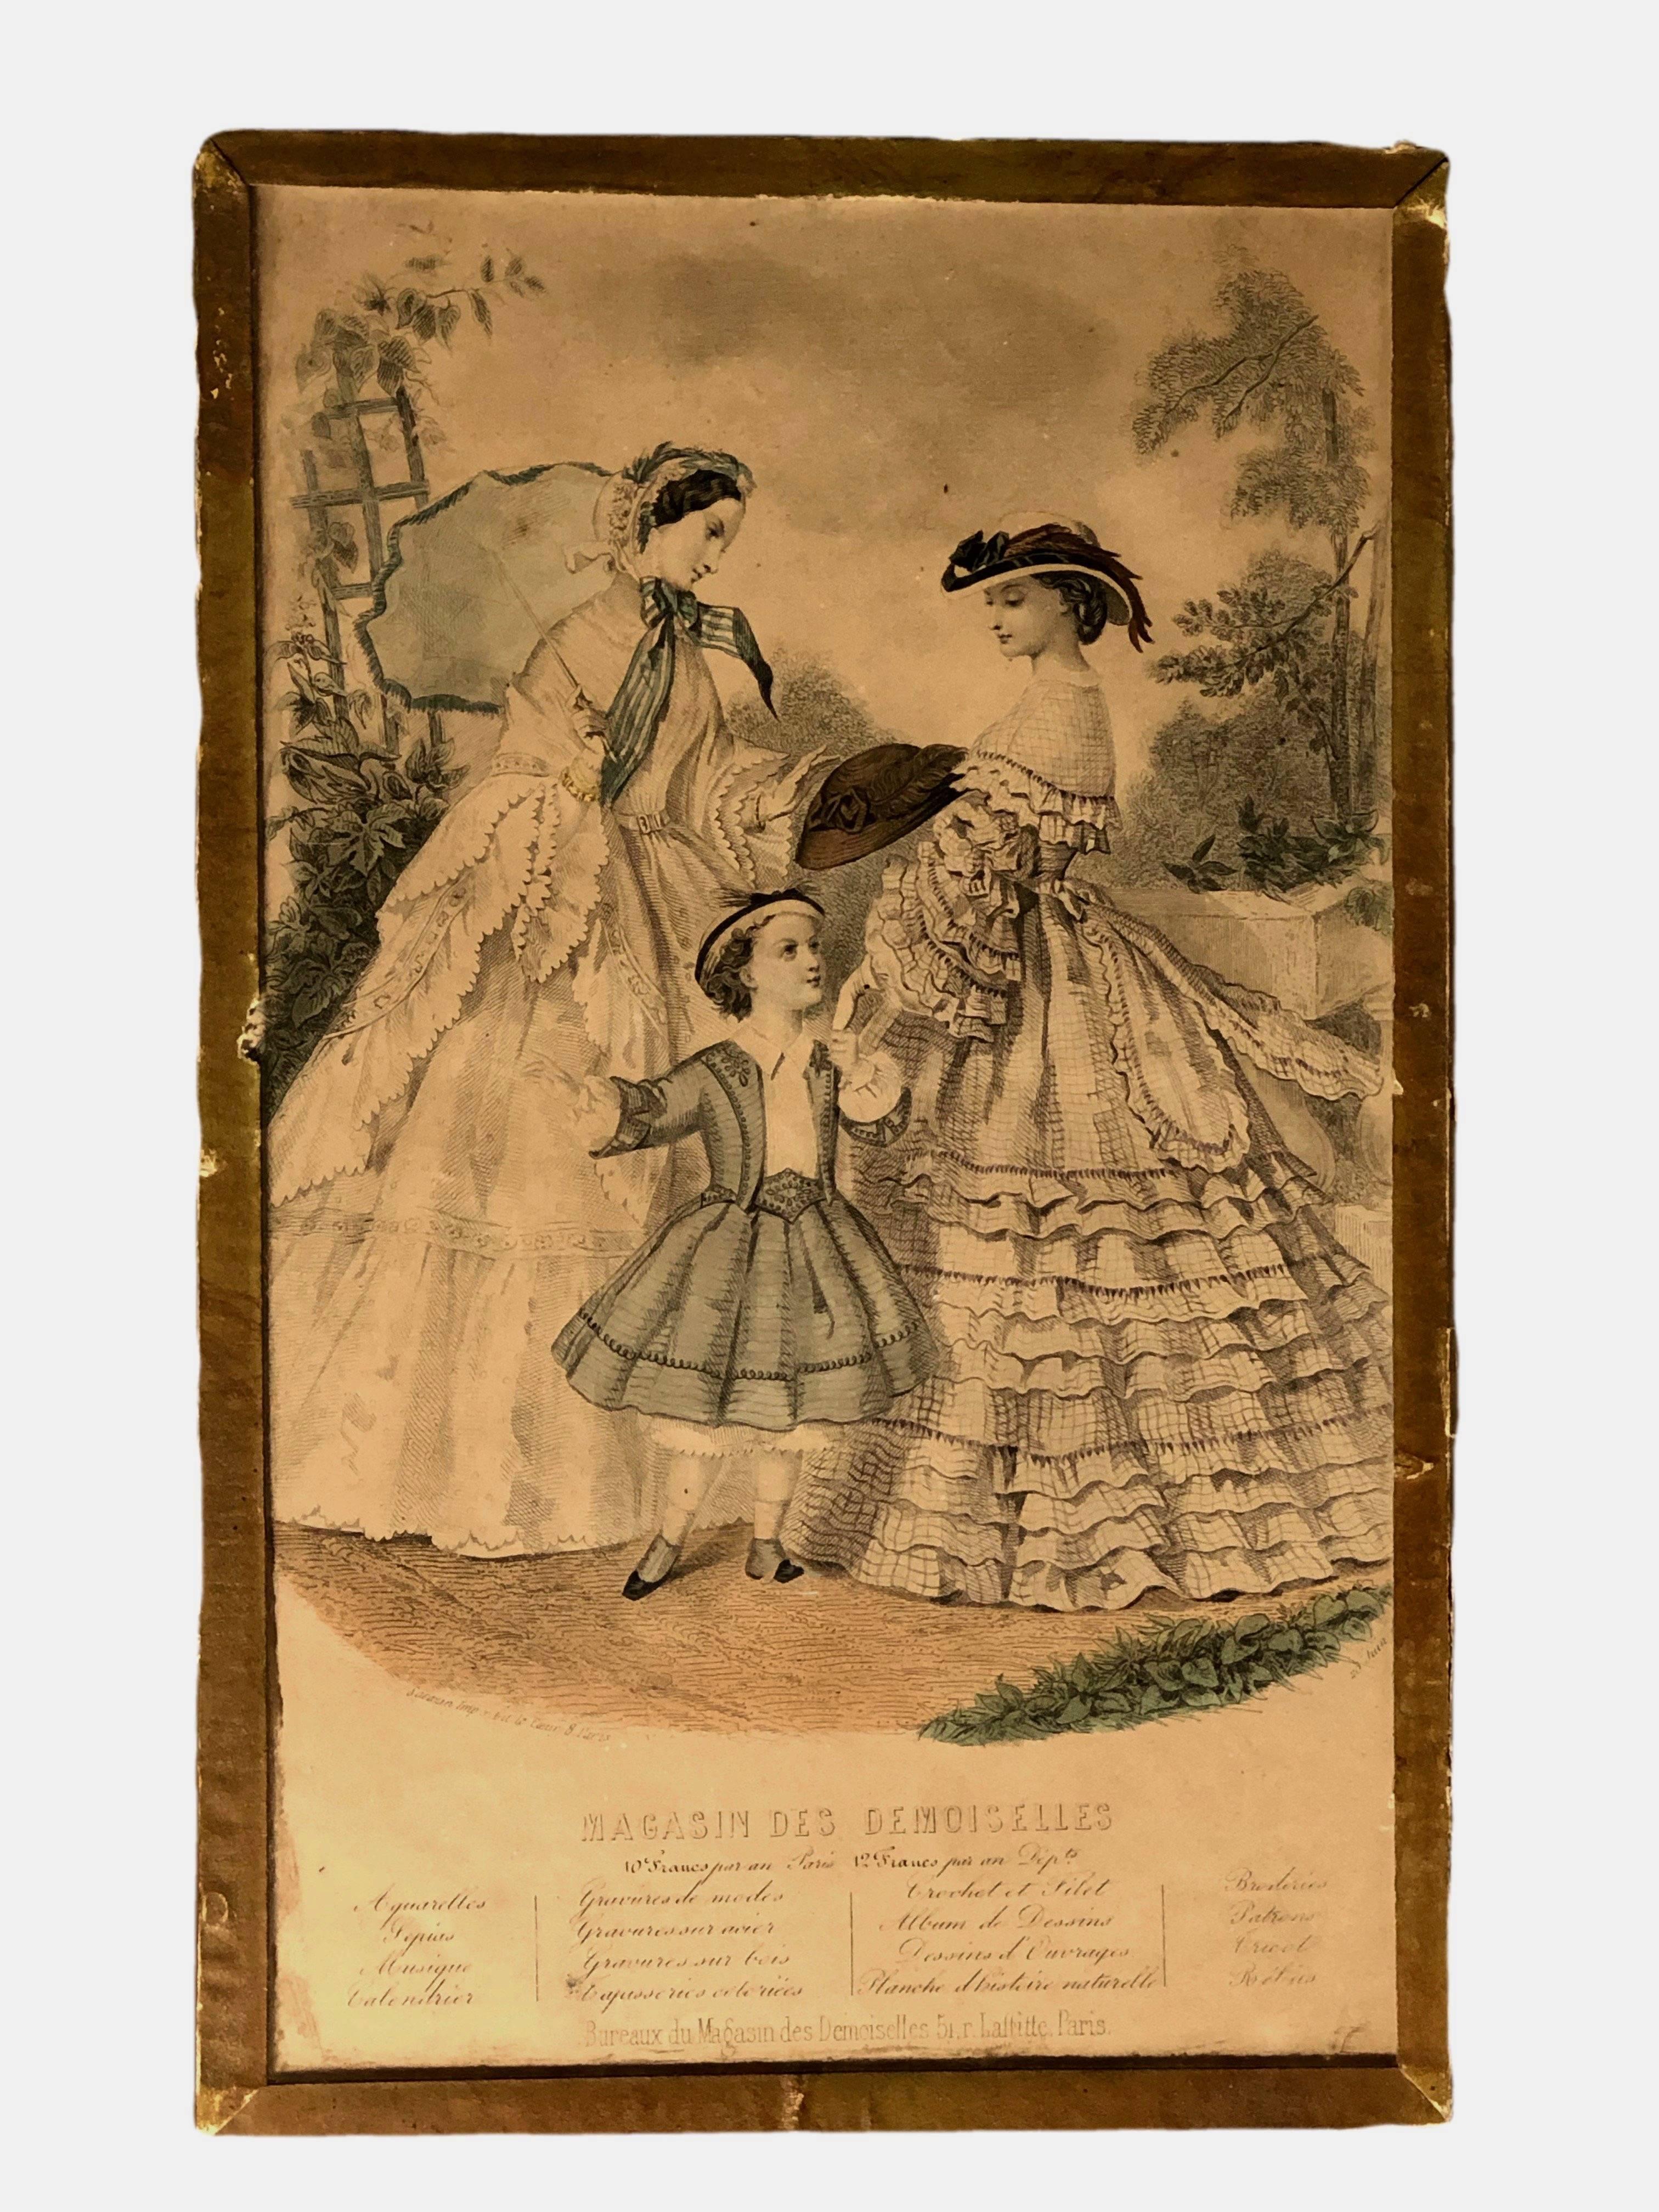 This is a wonderful collection of French fashion dress color engravings, collected from fashion magazines during the mid-1800s. The protective glass have decorative taped edges which was a simple way to frame during this period. These all come from